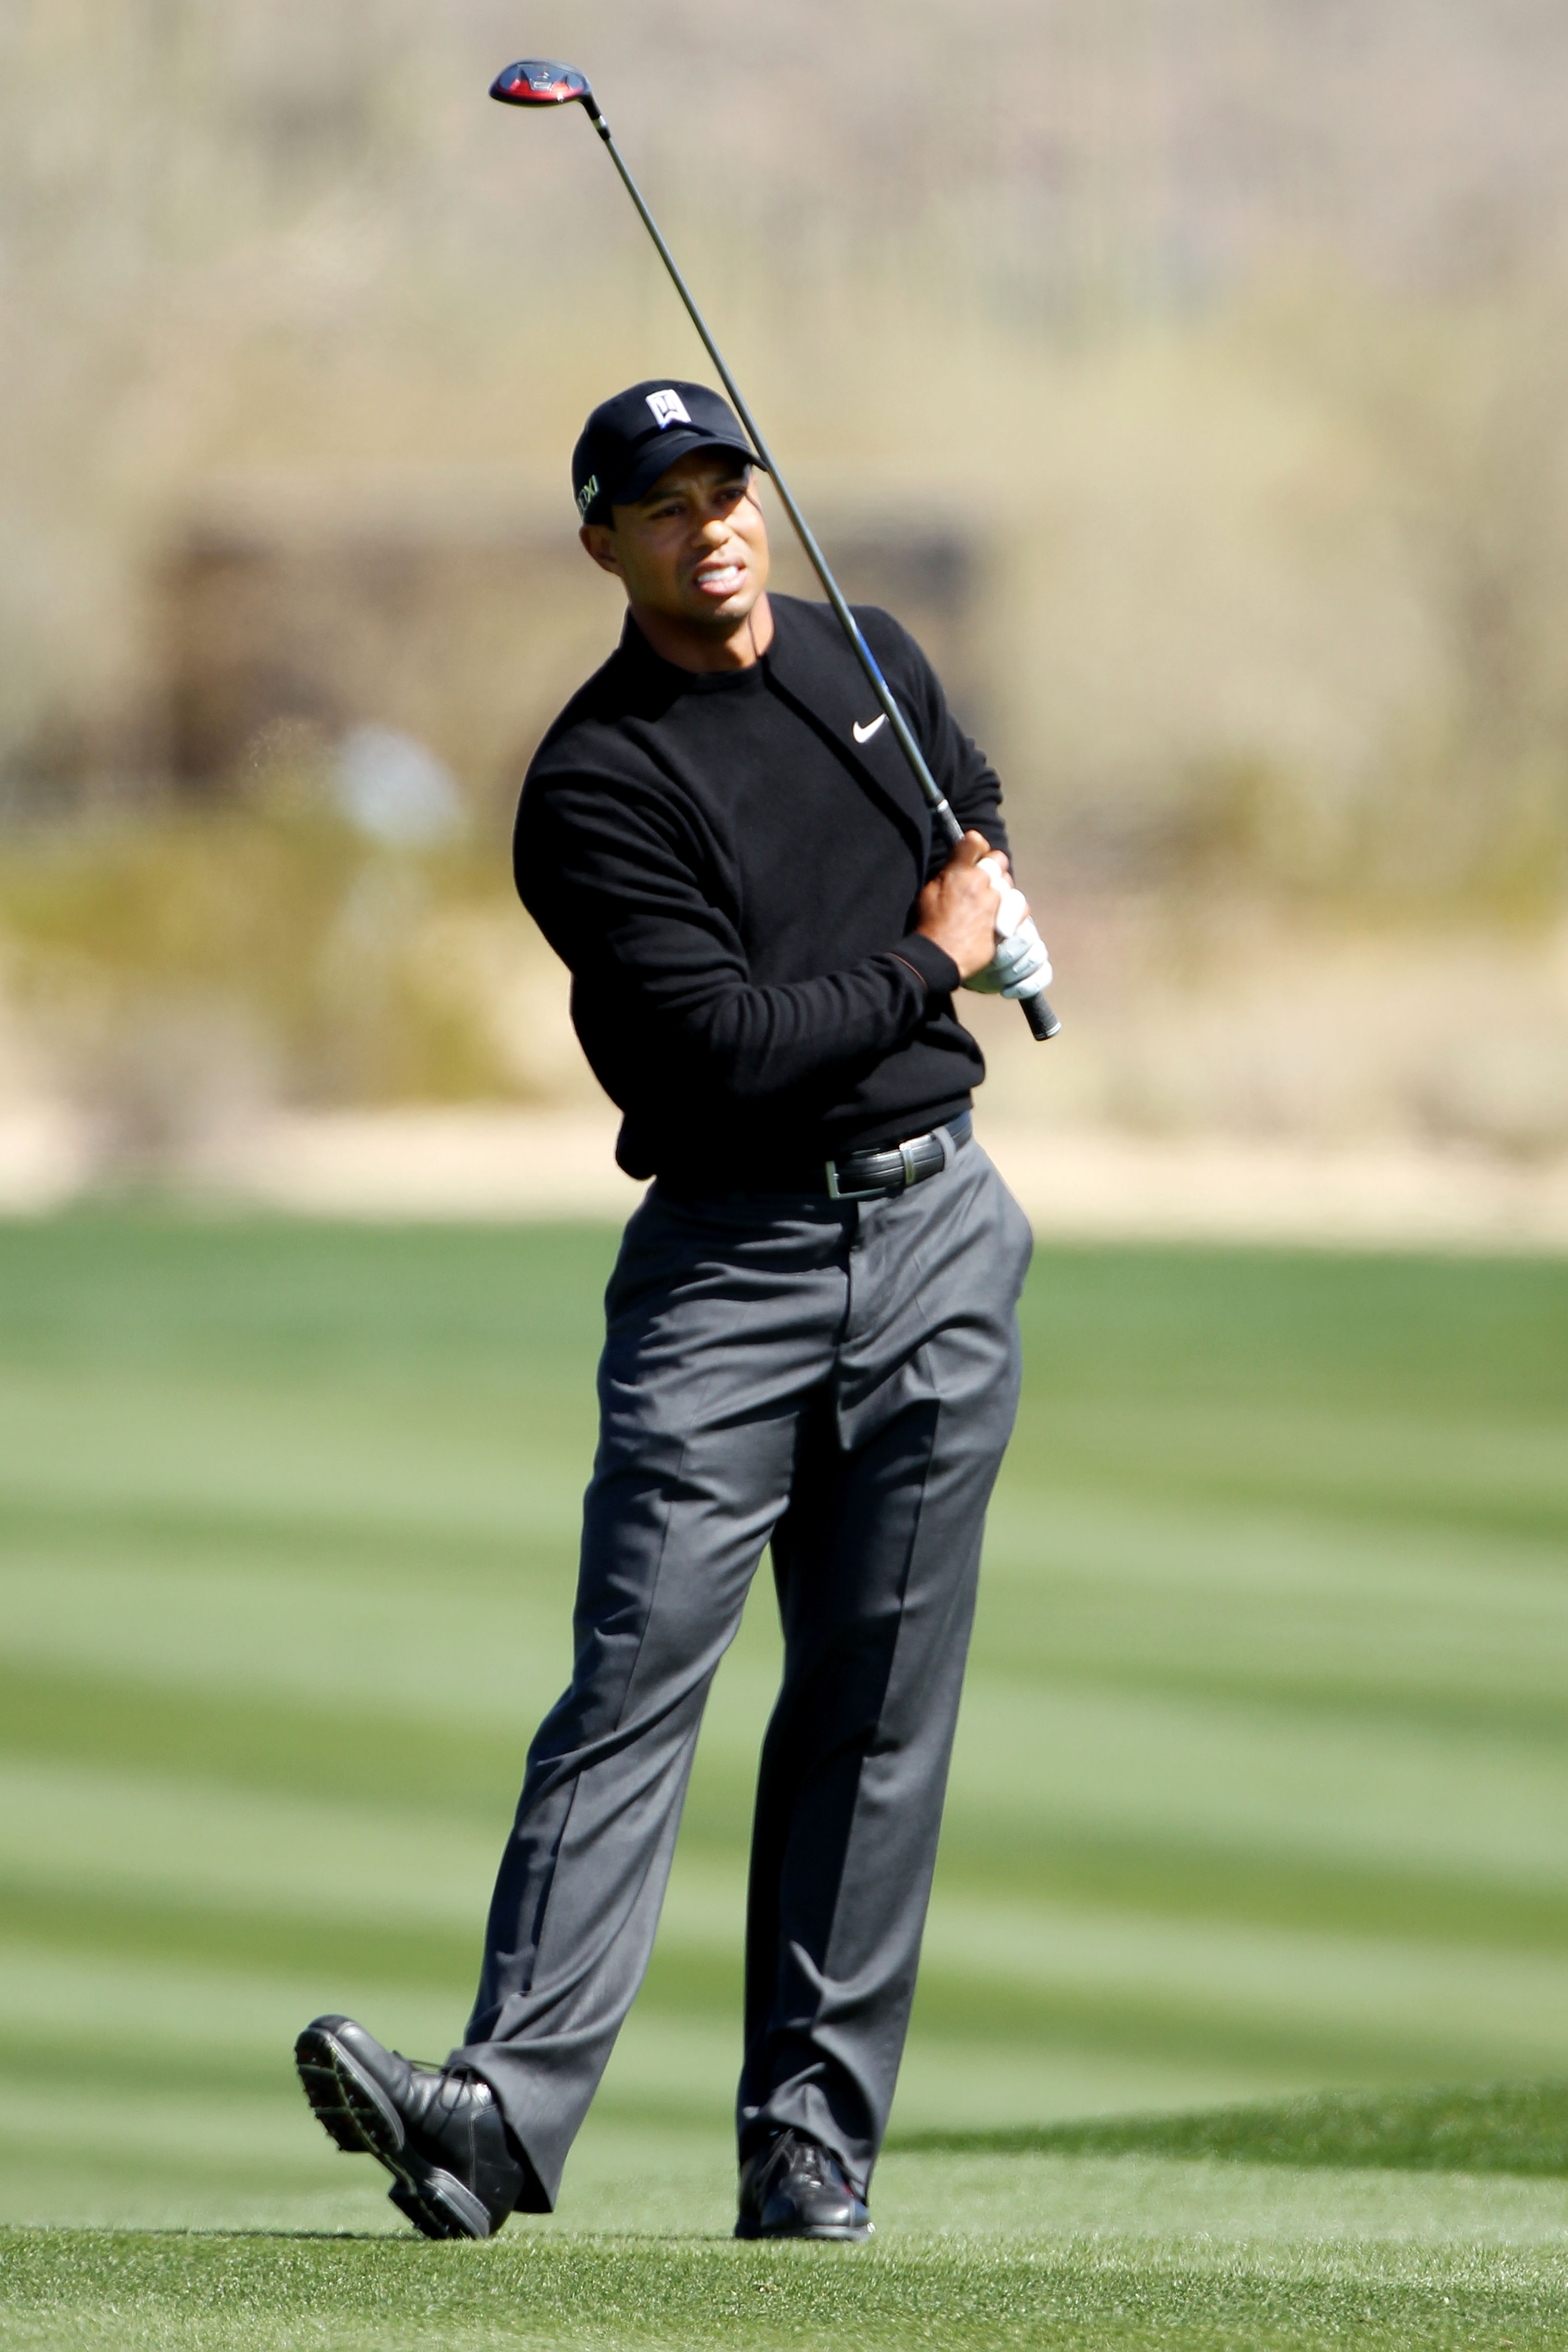 MARANA, AZ - FEBRUARY 23:  Tiger Woods watches his approach shot on the second hole during the first round of the Accenture Match Play Championship at the Ritz-Carlton Golf Club on February 23, 2011 in Marana, Arizona.  (Photo by Andy Lyons/Getty Images)